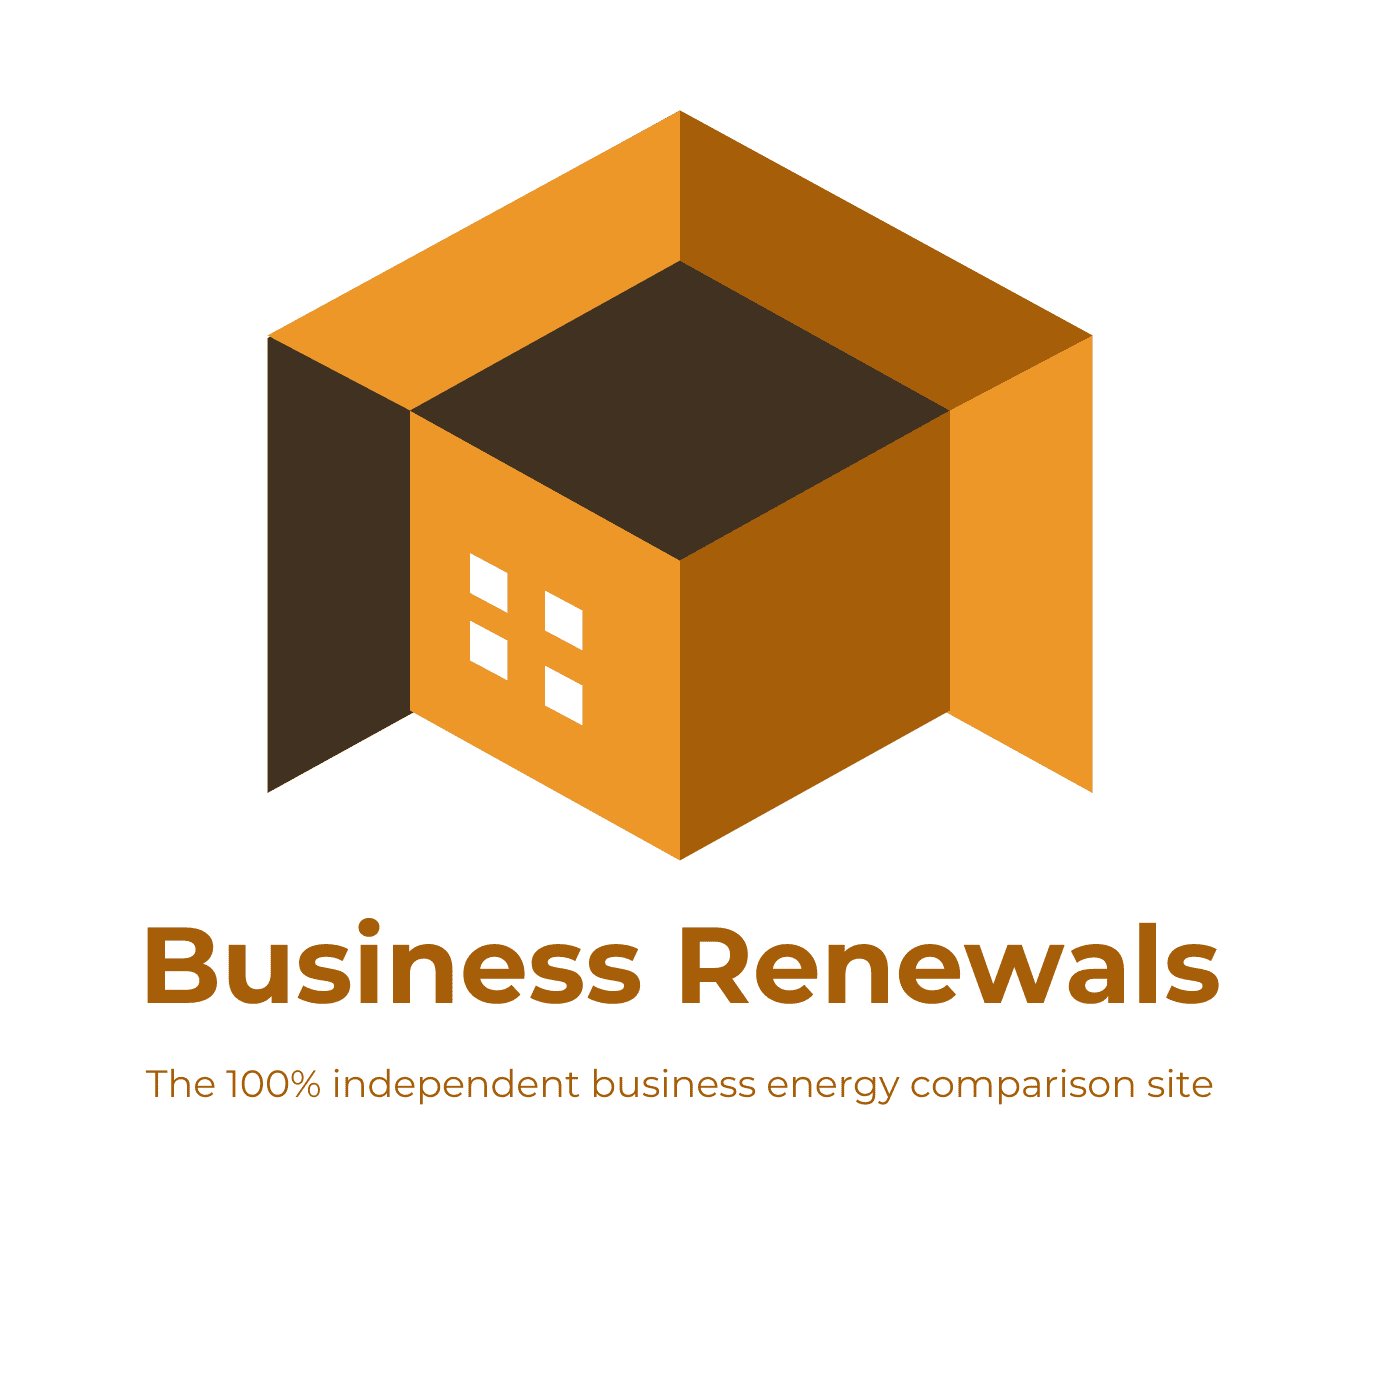 Beat the energy sales calls :)

We operate a fully online business energy comparison site giving small to medium businesses clear and transparent quotes